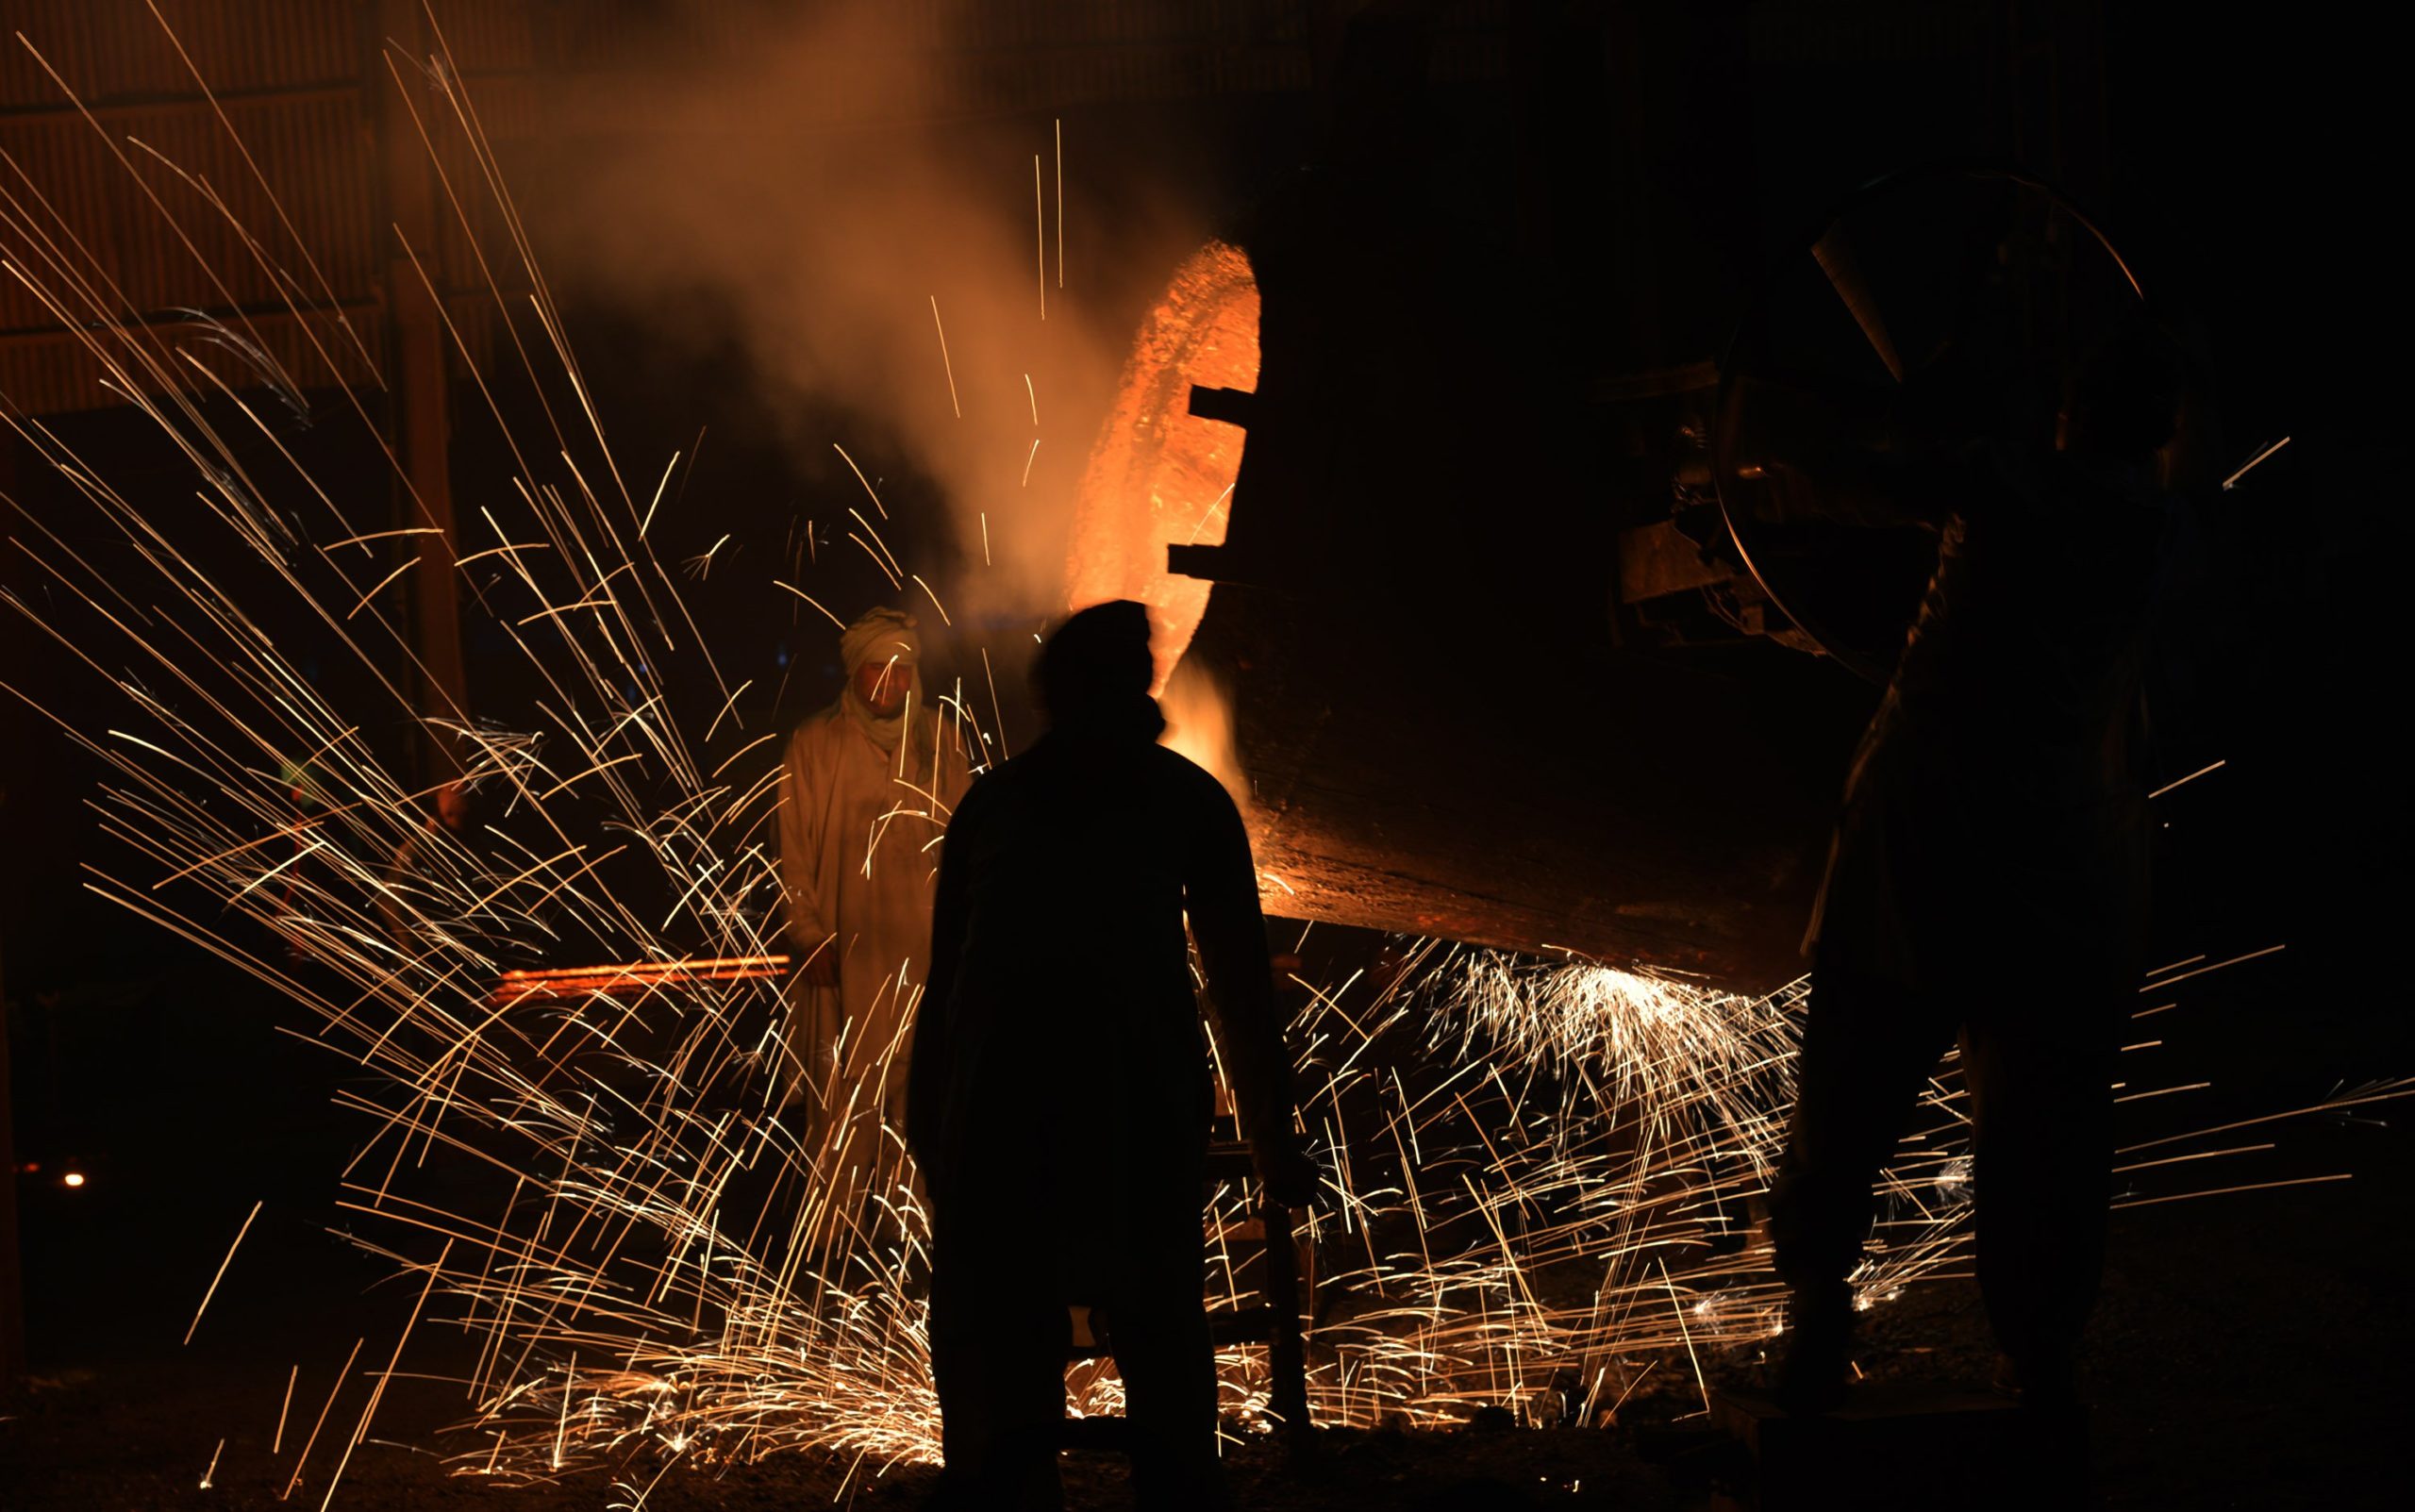 Pakistani blacksmiths work at an iron molding factory in industrial area ahead of International Labor Day.